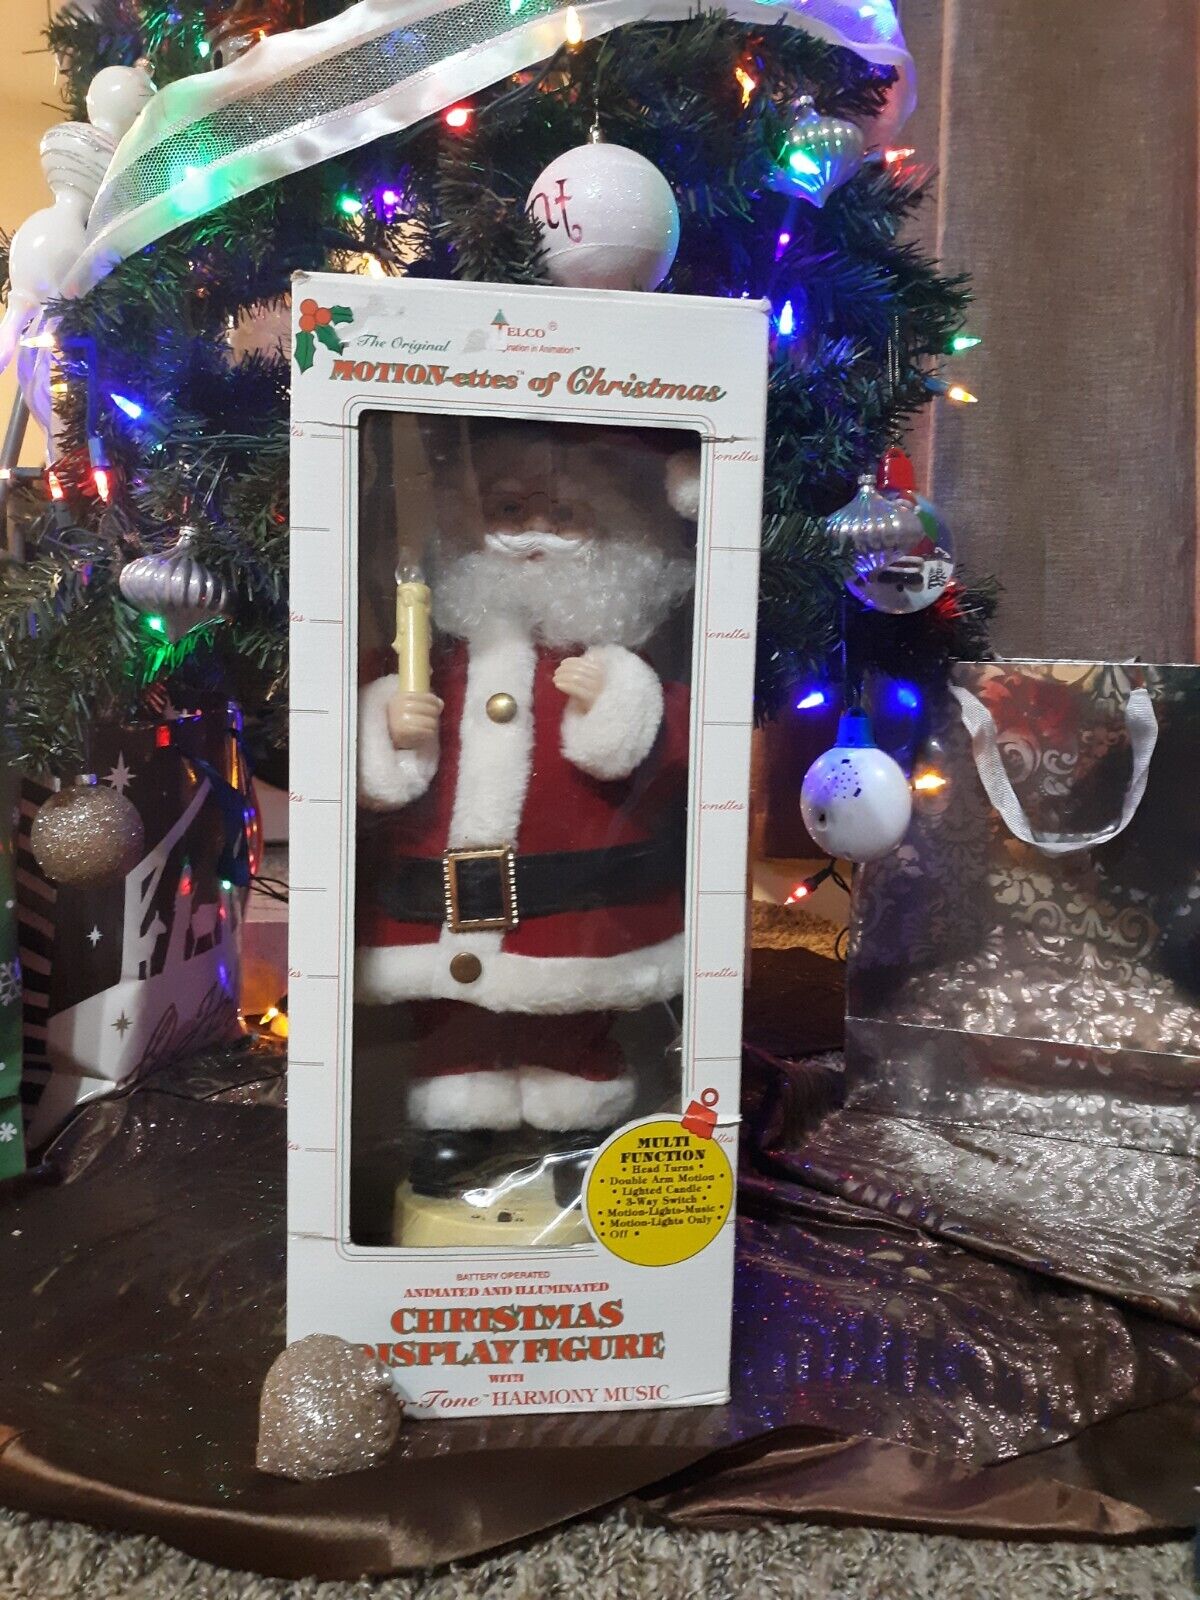 Vintage Telco Motionettes of Christmas Santa Claus  Animated Display Figure 1989